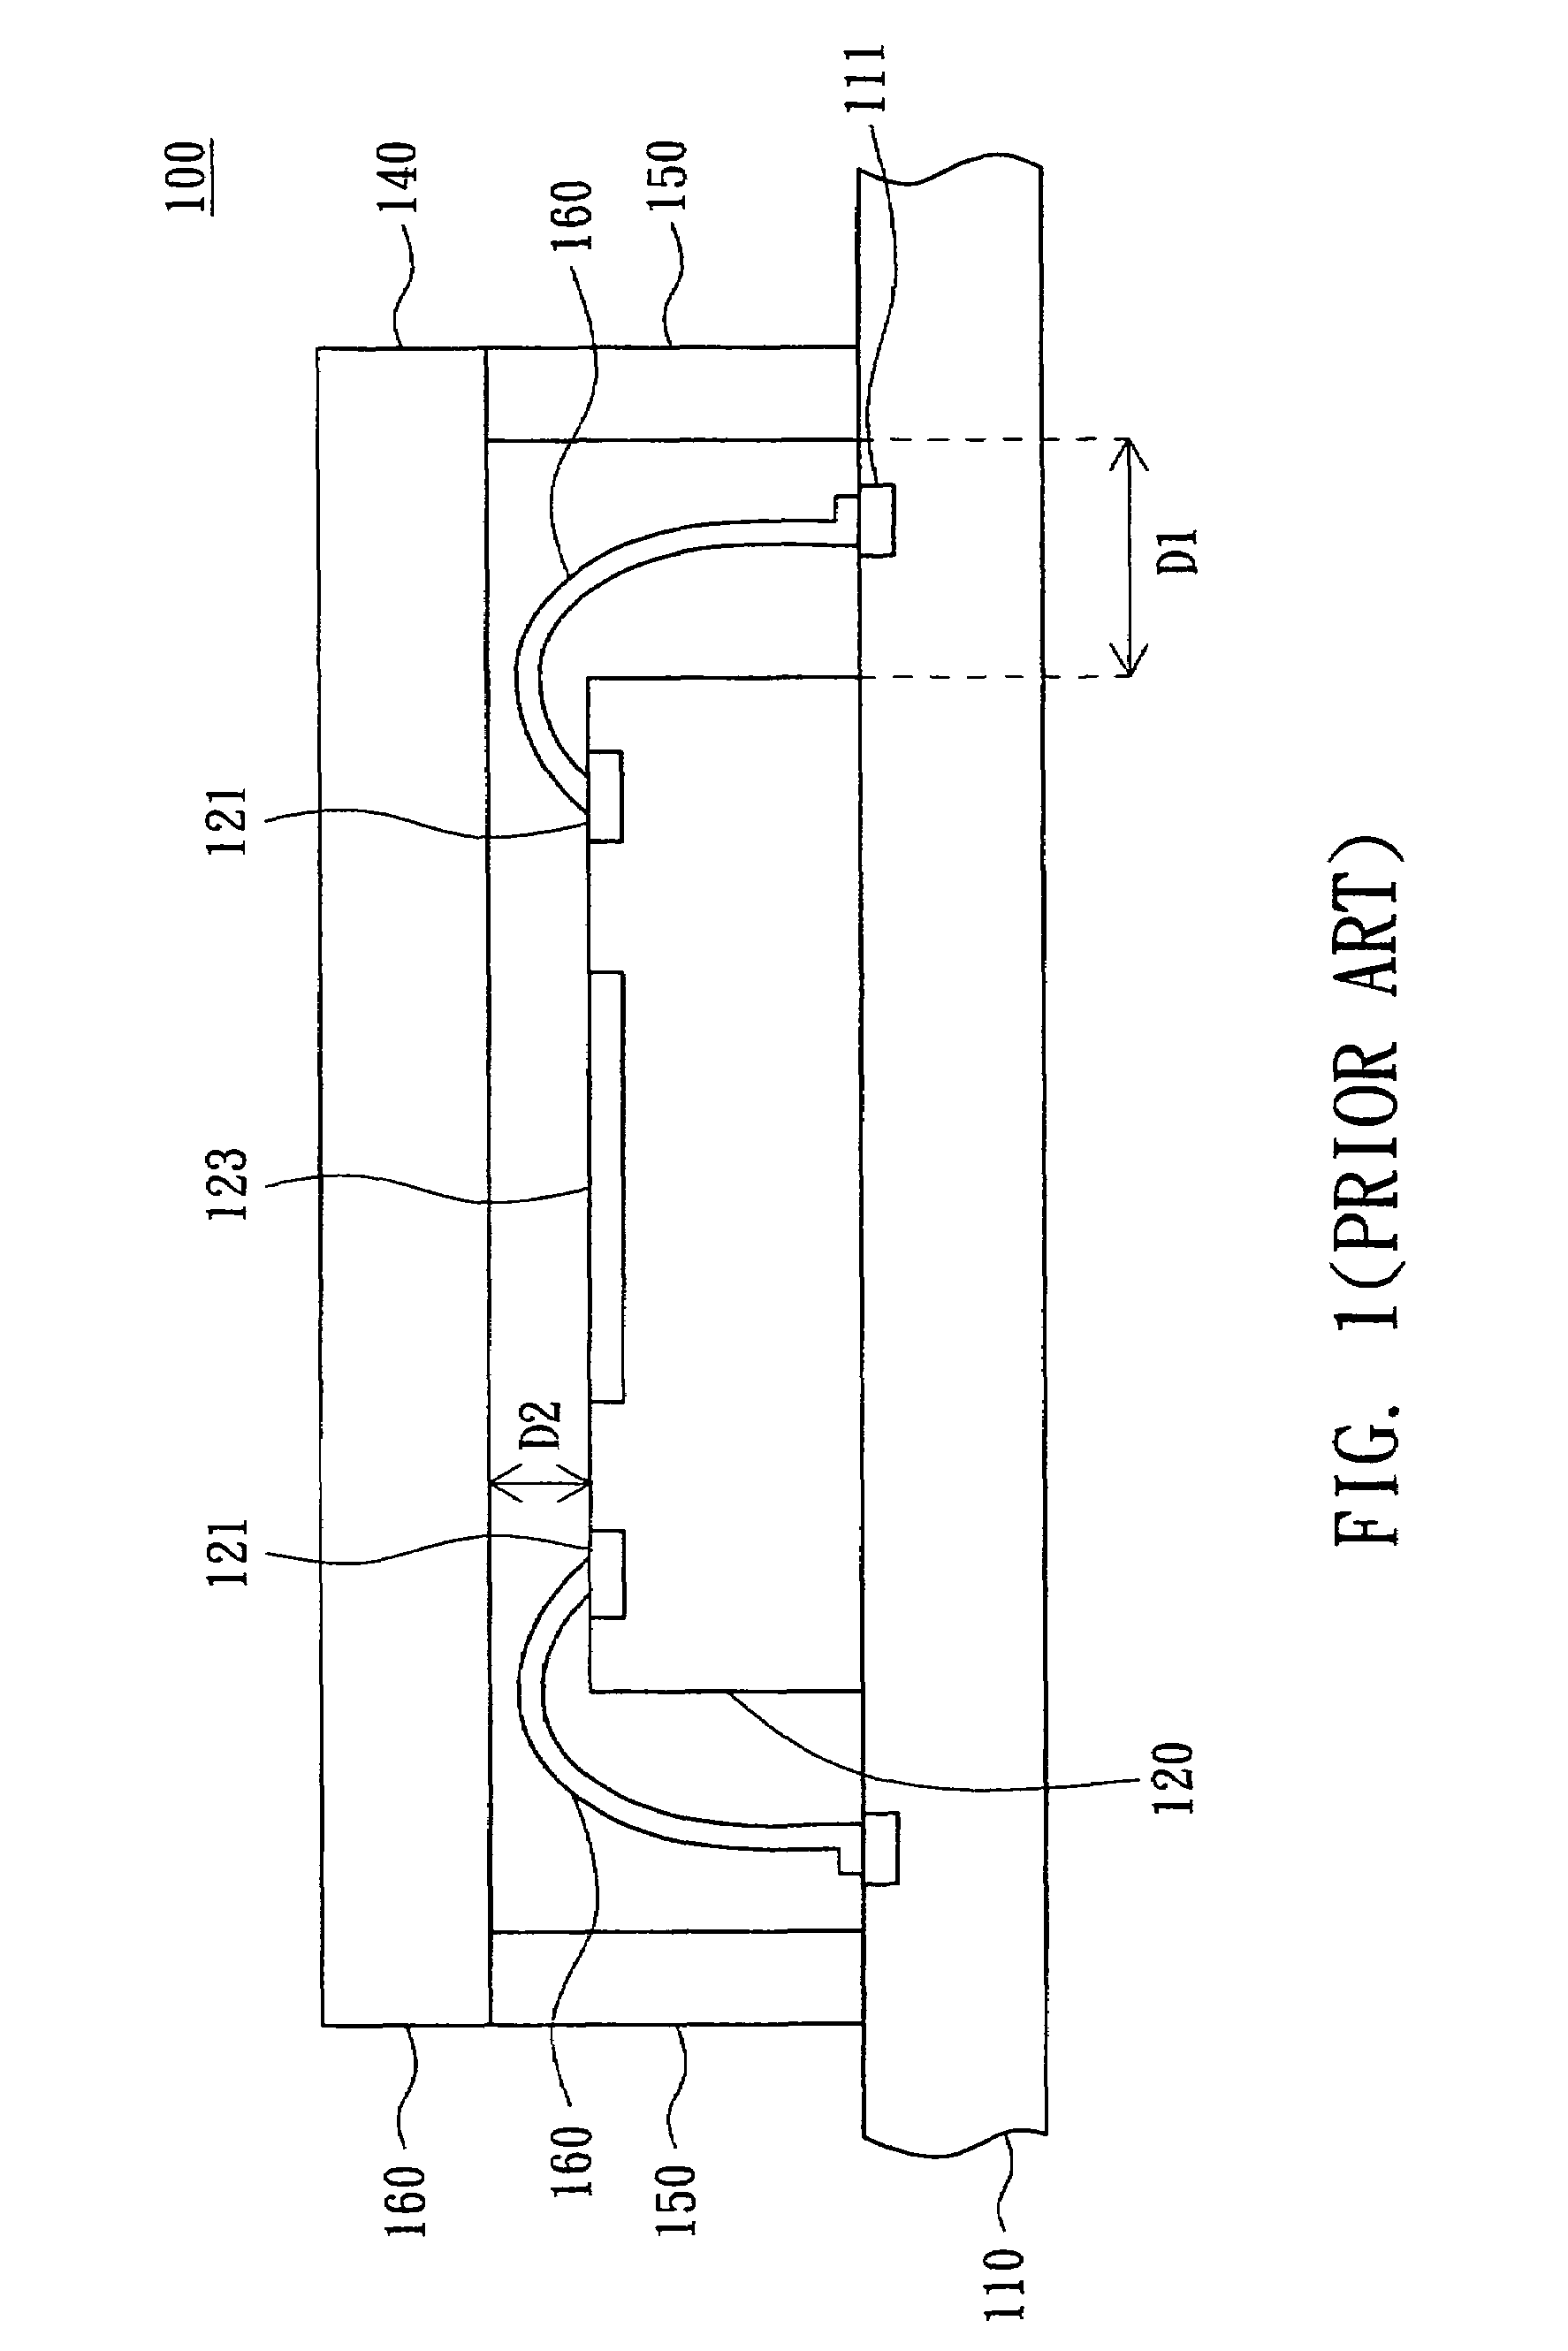 Package optical chip with conductive pillars